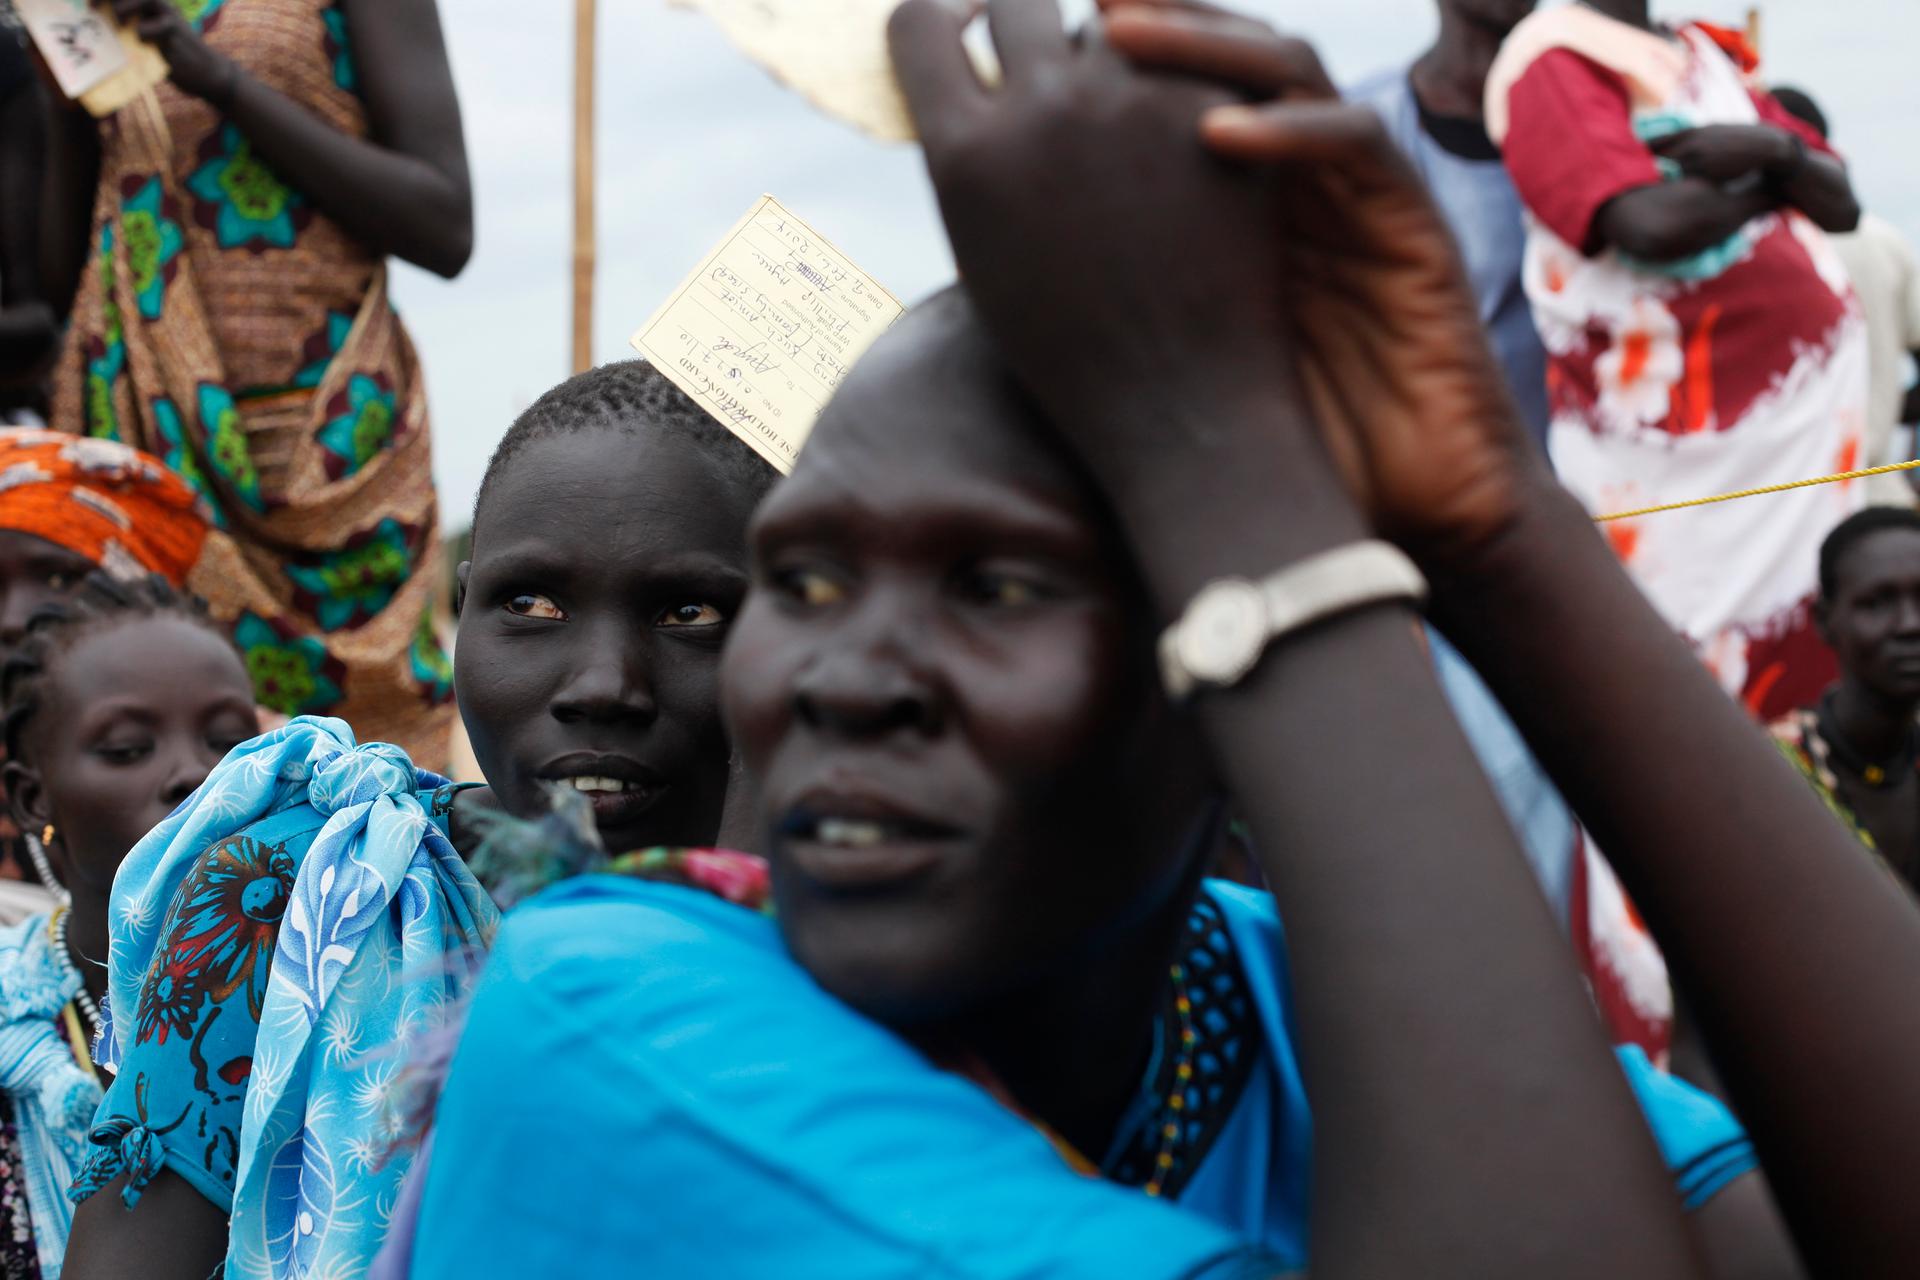 Women hold their ration cards during food distribution in Minkaman, Lakes State, June 26, 2014. About 94,000 people have sought refuge in Minkaman after fighting broke out in neighboring states, according to the International Organization for Migration.